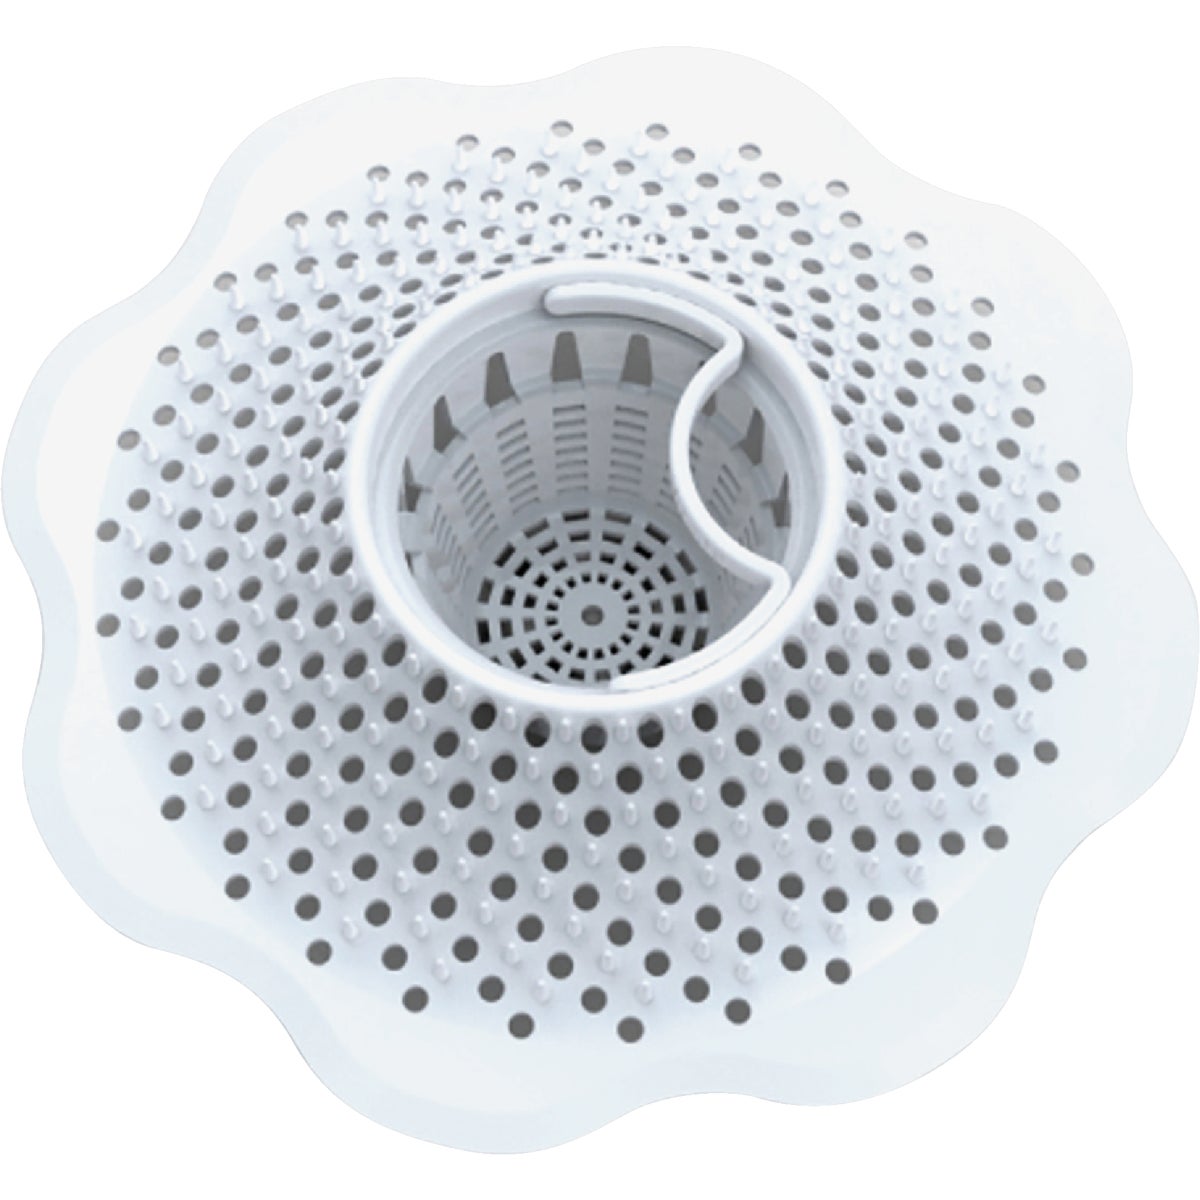 Item 405182, Tub hair catcher protects drains from unwanted debris.